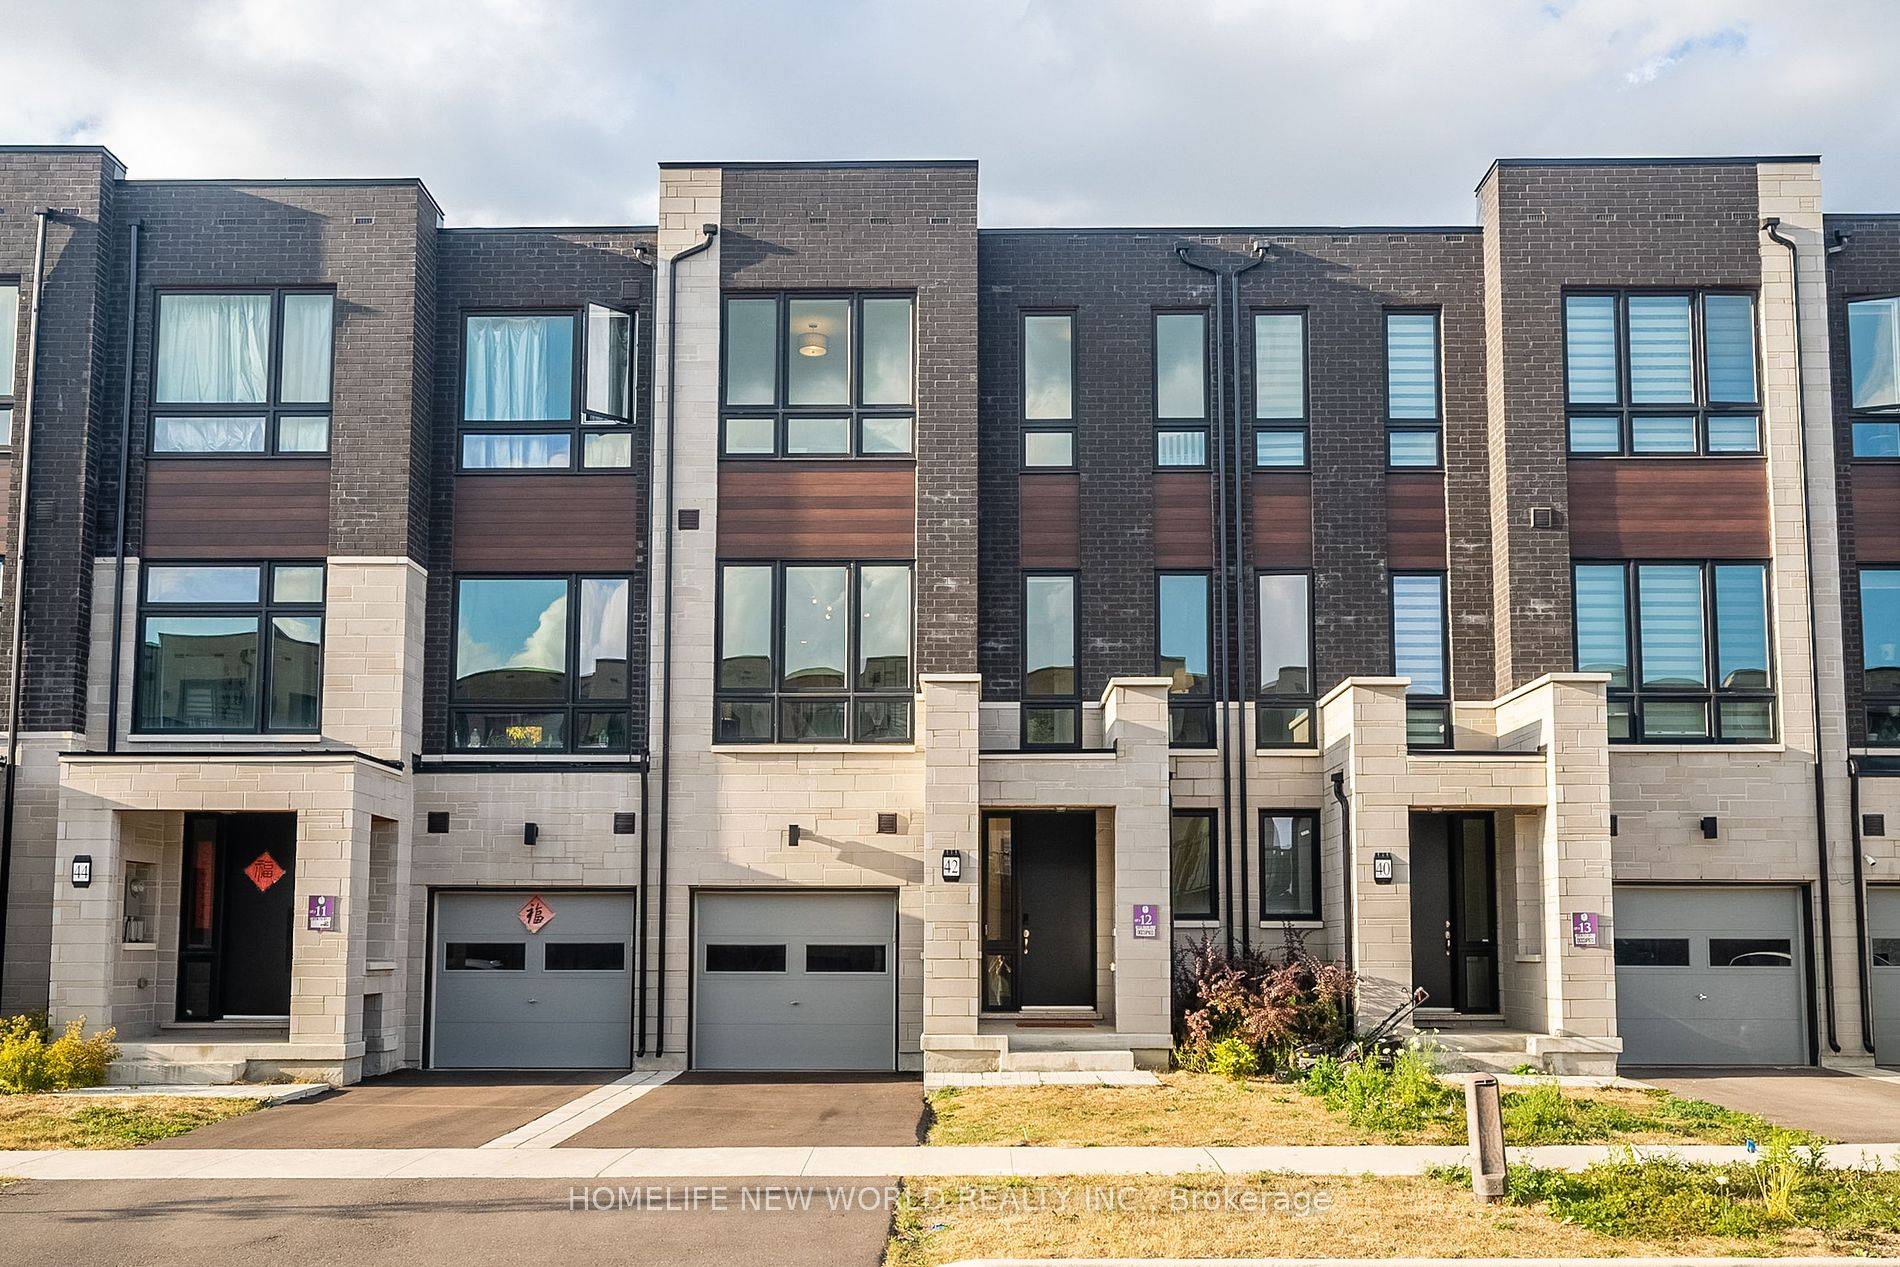 Rarely Rarely Offered Abbey Lane 3 Storey Freehold Luxurious, Spacious Modern Townhome, 2819SF Living Space Ground Main 3rd Additional BSMT, No plot fee, Nearly 23' Wide Back Into Forest Ravine ...